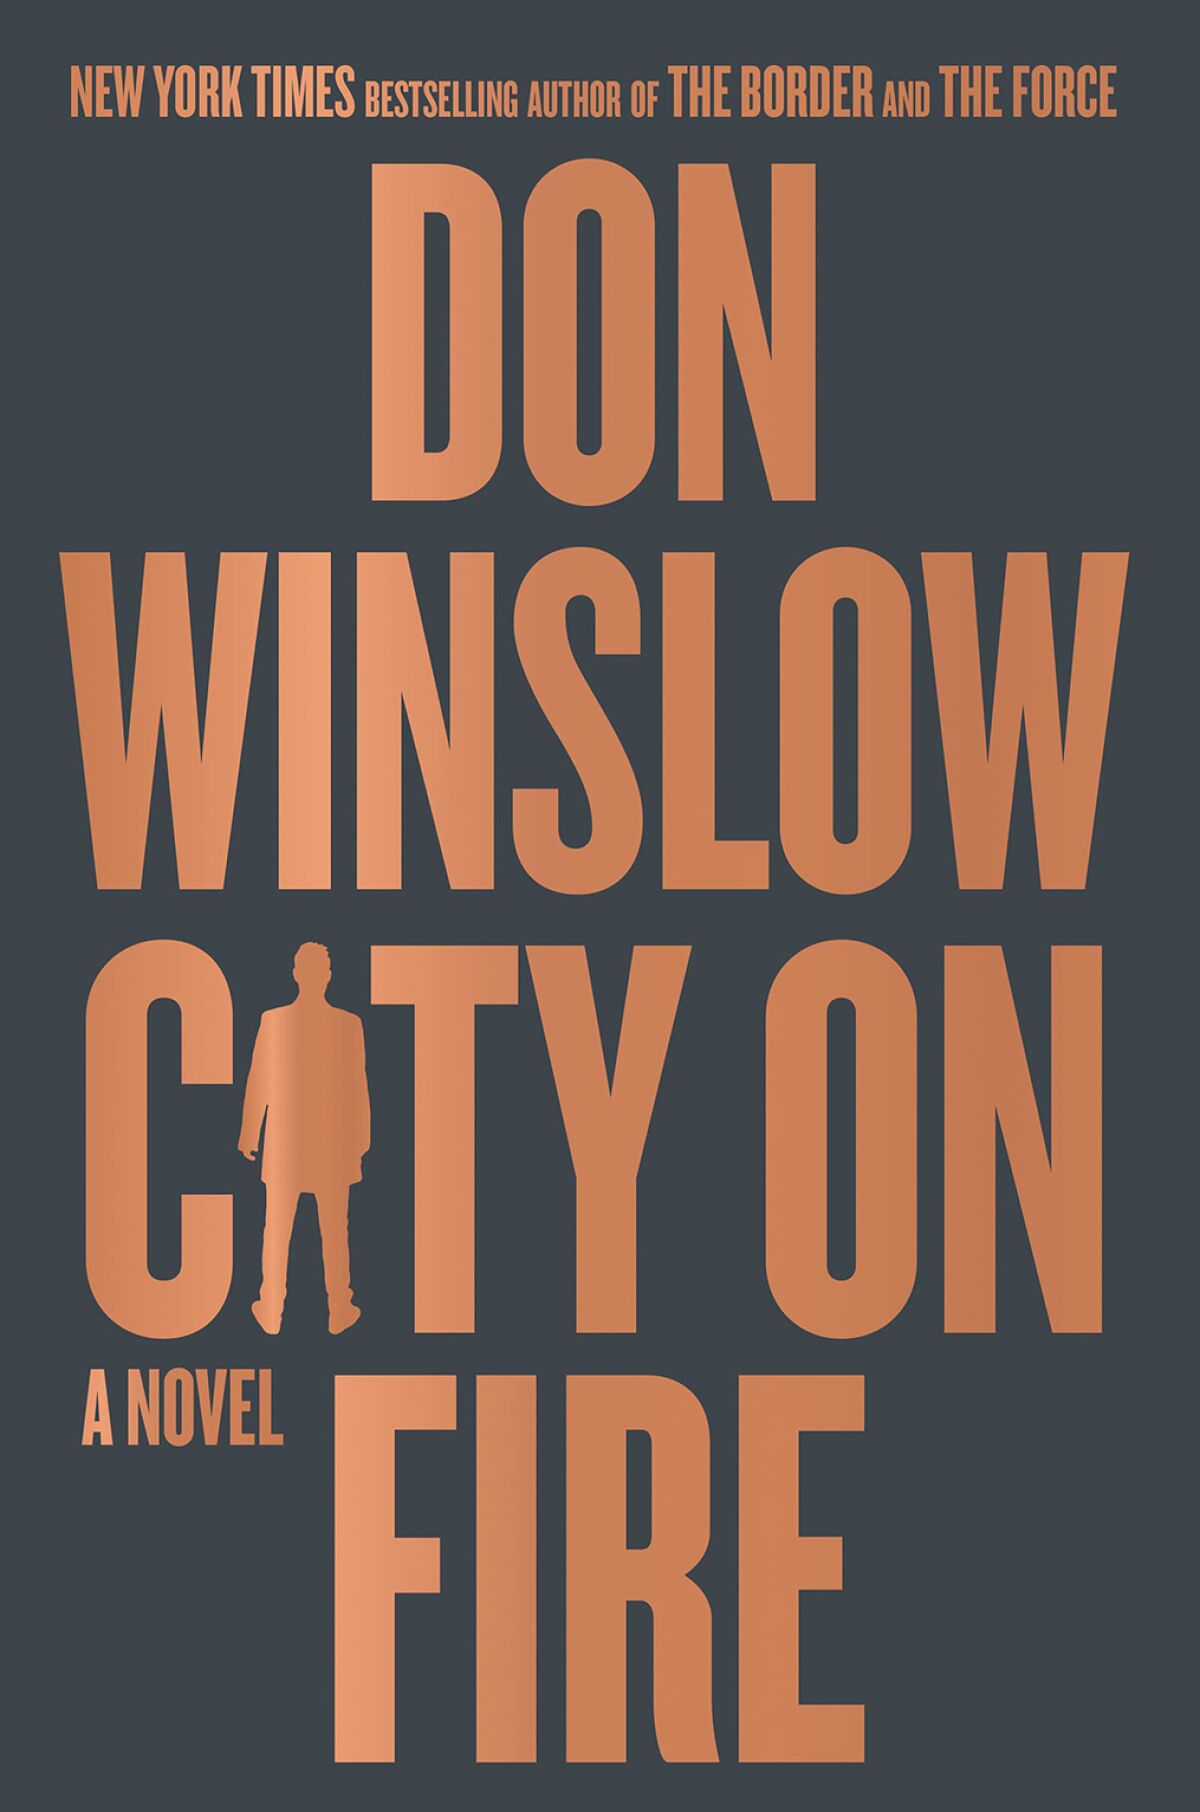 City on Fire book cover